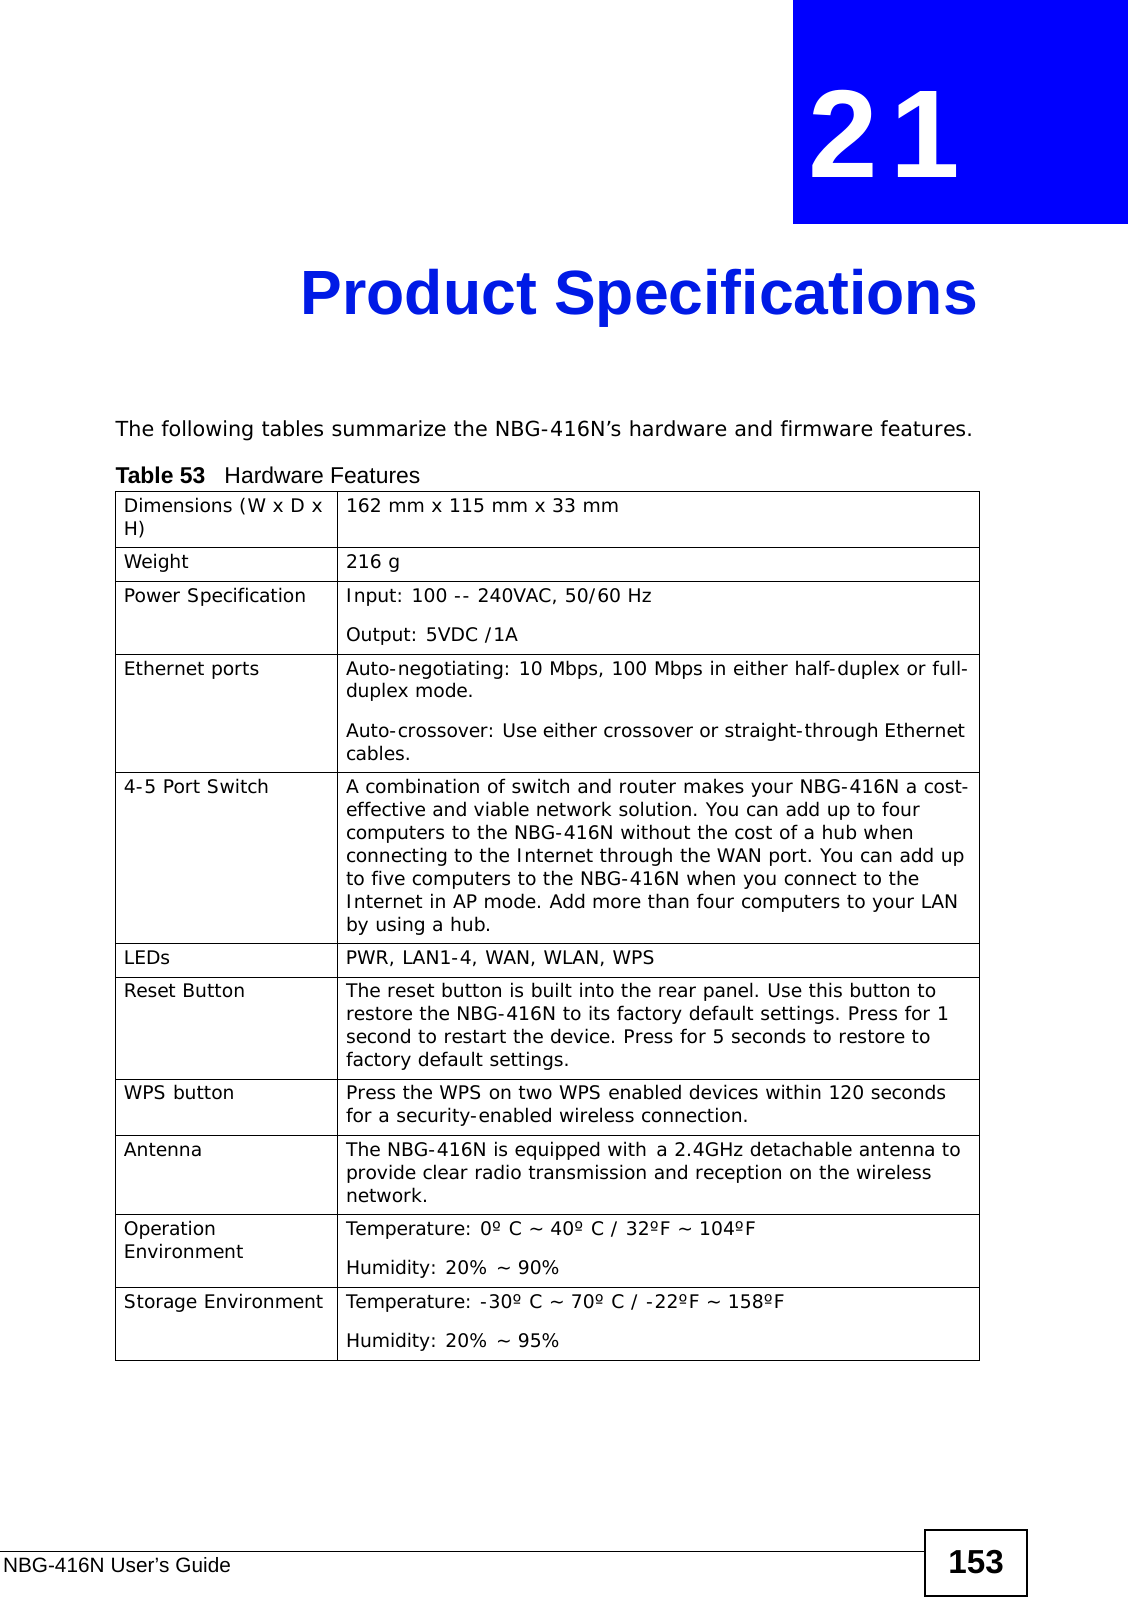 NBG-416N User’s Guide 153CHAPTER  21 Product SpecificationsThe following tables summarize the NBG-416N’s hardware and firmware features.Table 53   Hardware FeaturesDimensions (W x D x H)  162 mm x 115 mm x 33 mmWeight 216 gPower Specification Input: 100 -- 240VAC, 50/60 HzOutput: 5VDC /1AEthernet ports Auto-negotiating: 10 Mbps, 100 Mbps in either half-duplex or full-duplex mode.Auto-crossover: Use either crossover or straight-through Ethernet cables.4-5 Port Switch A combination of switch and router makes your NBG-416N a cost-effective and viable network solution. You can add up to four computers to the NBG-416N without the cost of a hub when connecting to the Internet through the WAN port. You can add up to five computers to the NBG-416N when you connect to the Internet in AP mode. Add more than four computers to your LAN by using a hub.LEDs PWR, LAN1-4, WAN, WLAN, WPSReset Button The reset button is built into the rear panel. Use this button to restore the NBG-416N to its factory default settings. Press for 1 second to restart the device. Press for 5 seconds to restore to factory default settings.WPS button Press the WPS on two WPS enabled devices within 120 seconds for a security-enabled wireless connection.Antenna The NBG-416N is equipped with a 2.4GHz detachable antenna to provide clear radio transmission and reception on the wireless network. Operation Environment Temperature: 0º C ~ 40º C / 32ºF ~ 104ºFHumidity: 20% ~ 90% Storage Environment Temperature: -30º C ~ 70º C / -22ºF ~ 158ºFHumidity: 20% ~ 95% 